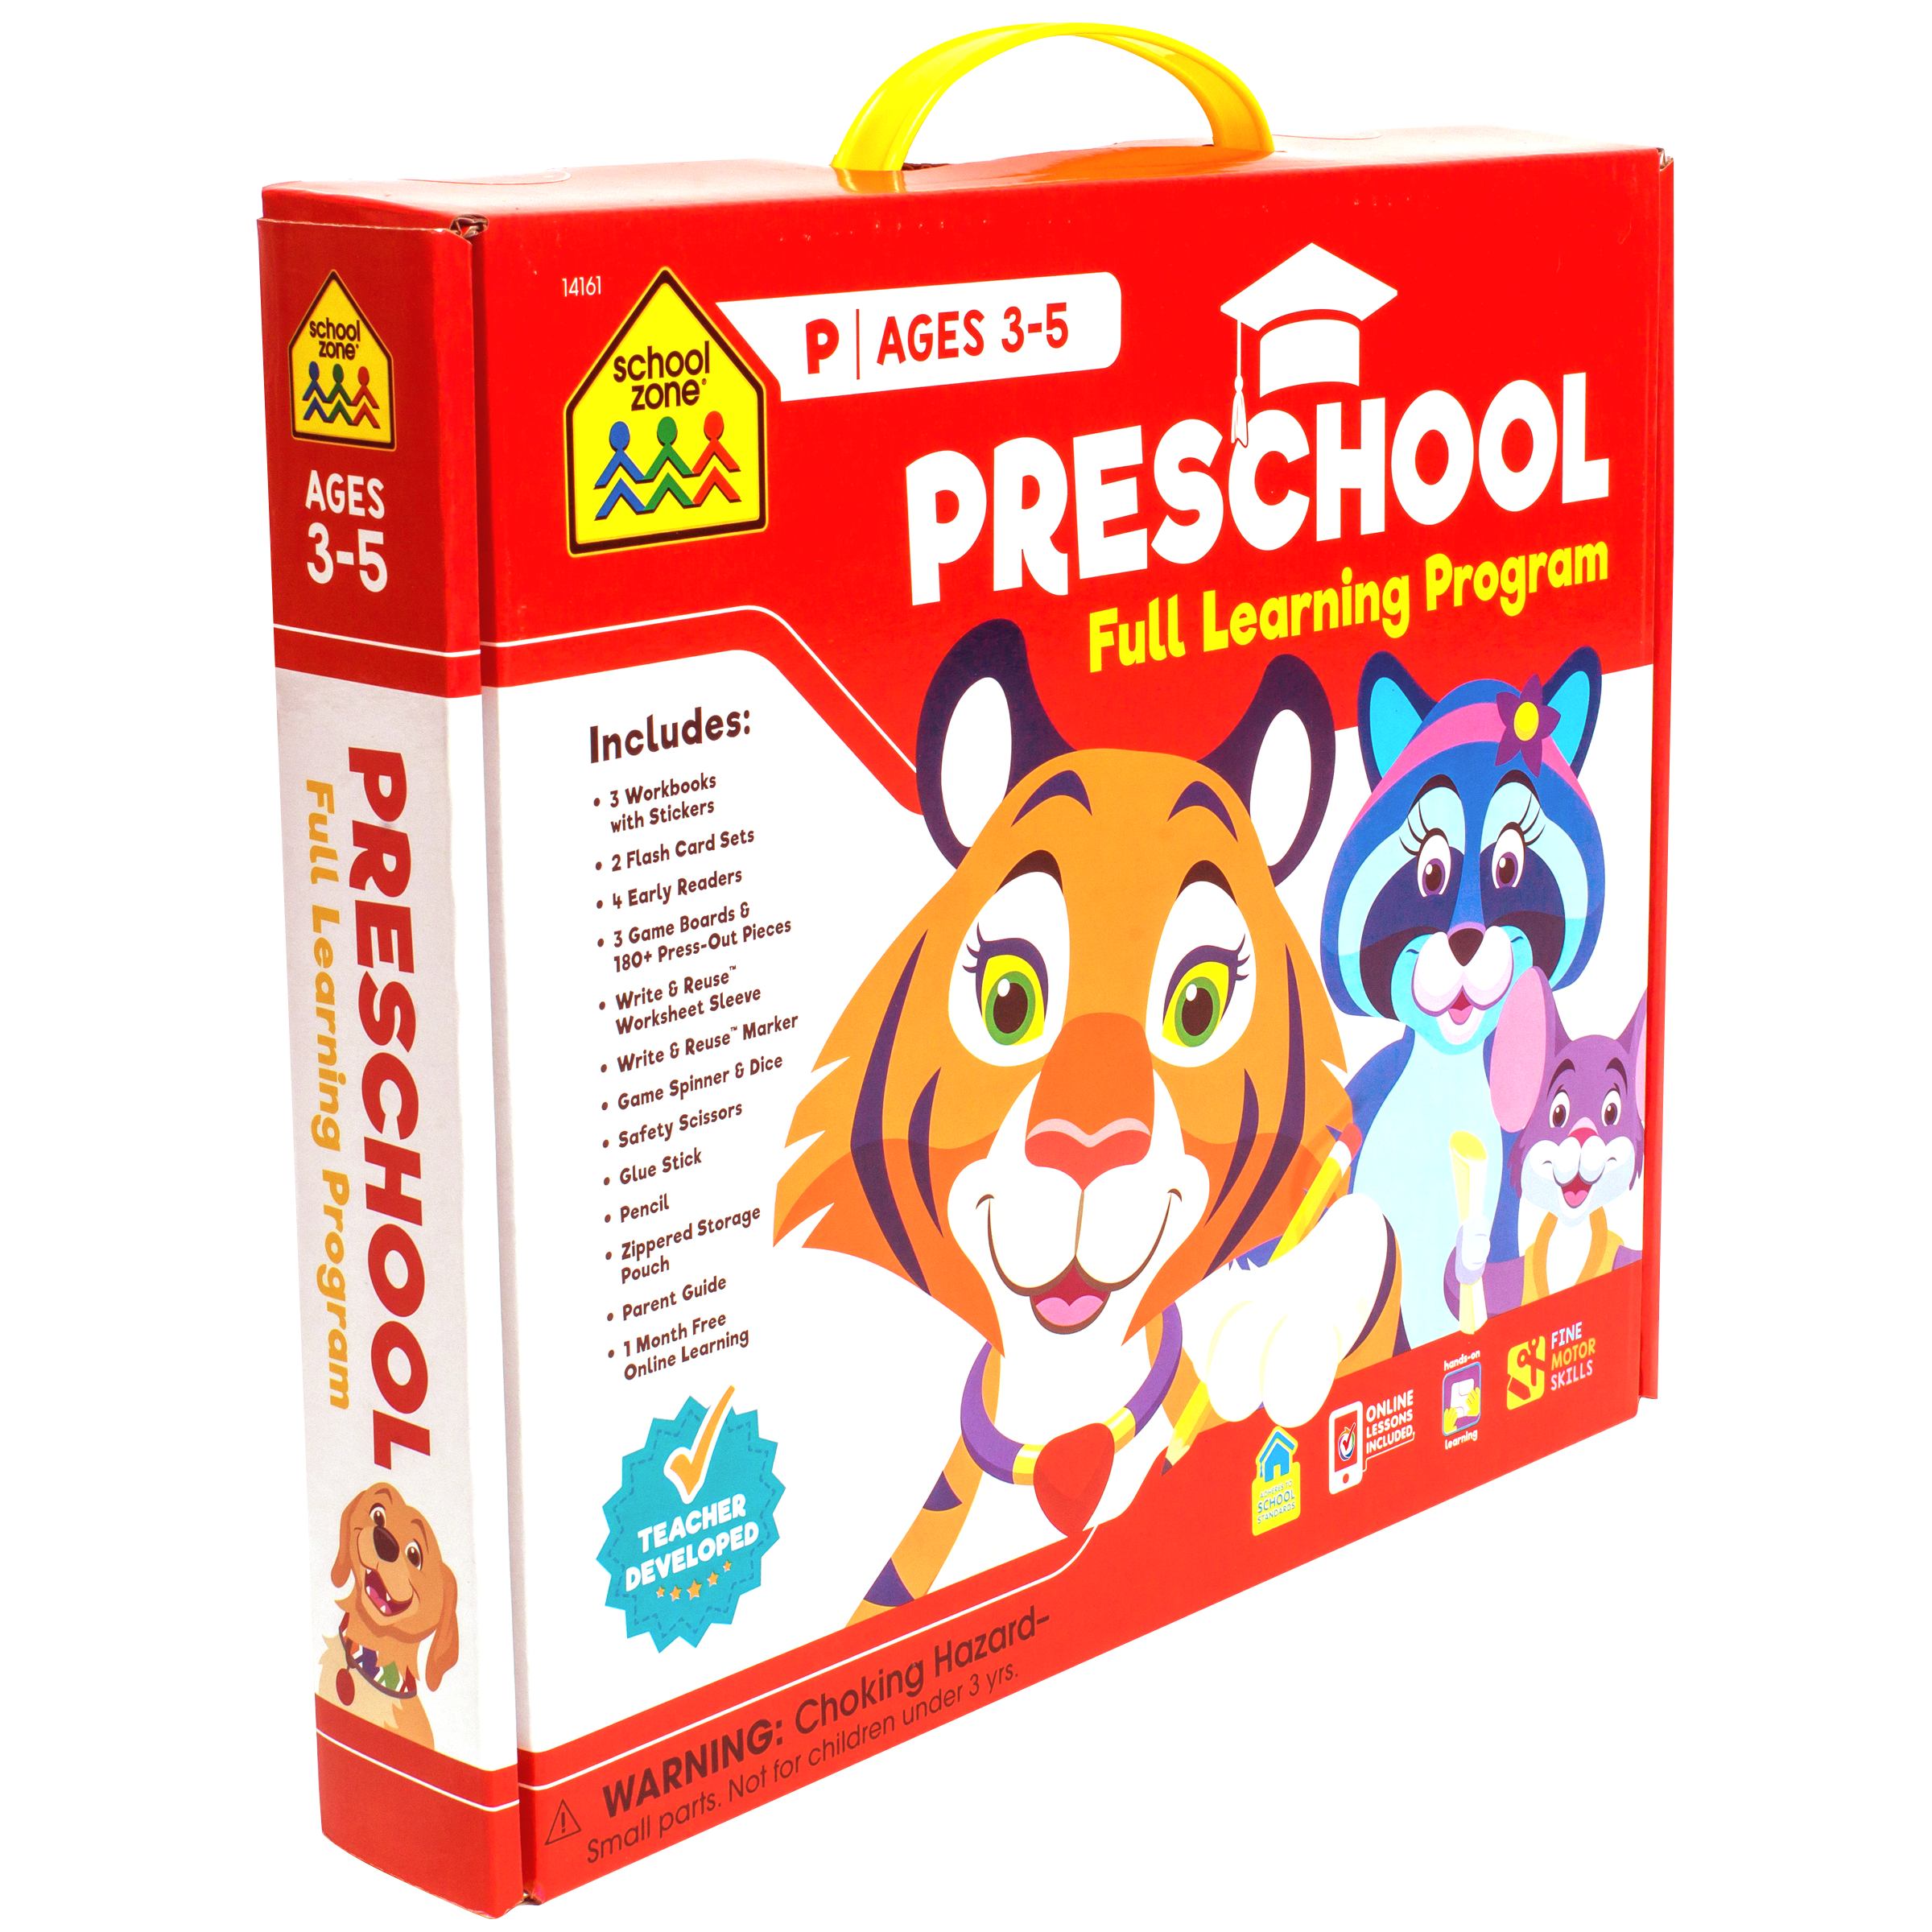 Small Learning Box 3-5 Years - The Learning Box Preschool